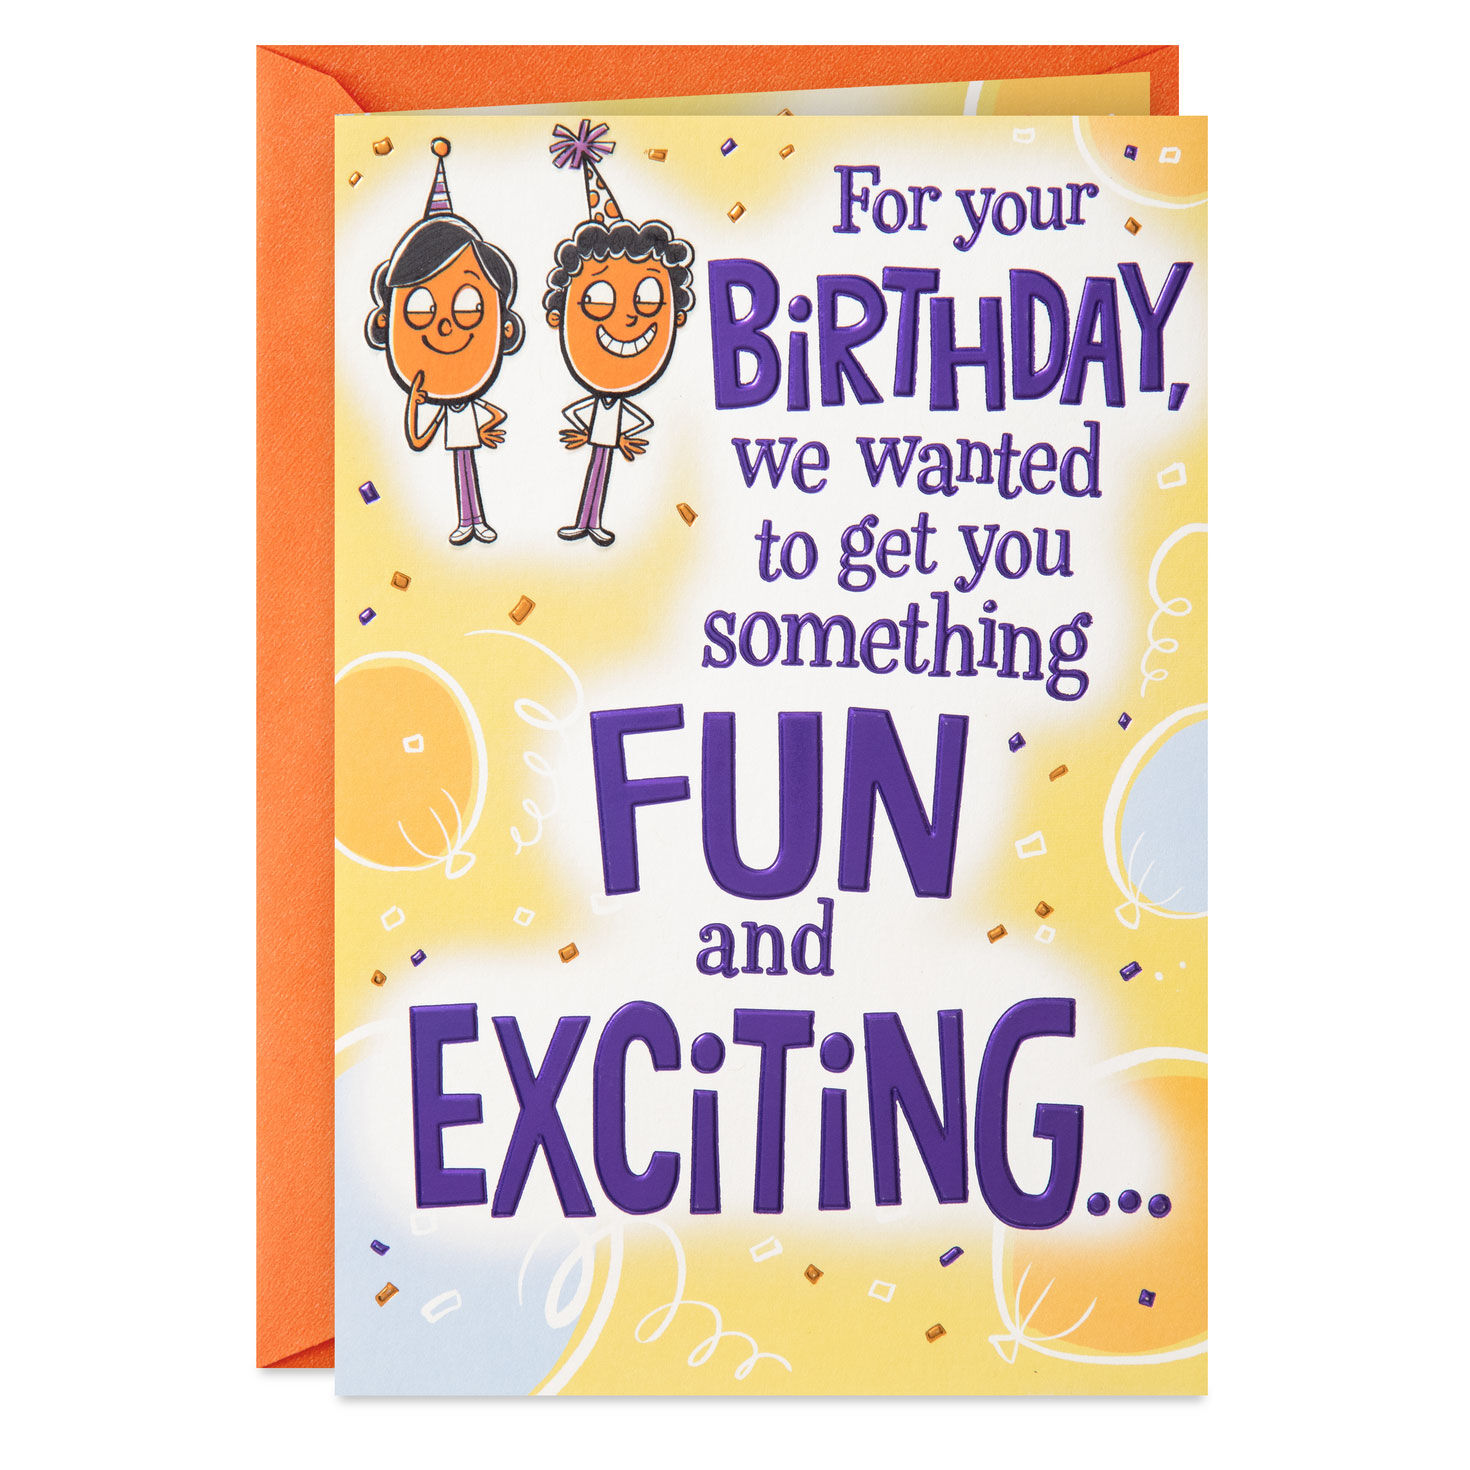 We Wanted to Get You Something Exciting Funny Birthday Card From Us for only USD 4.59 | Hallmark